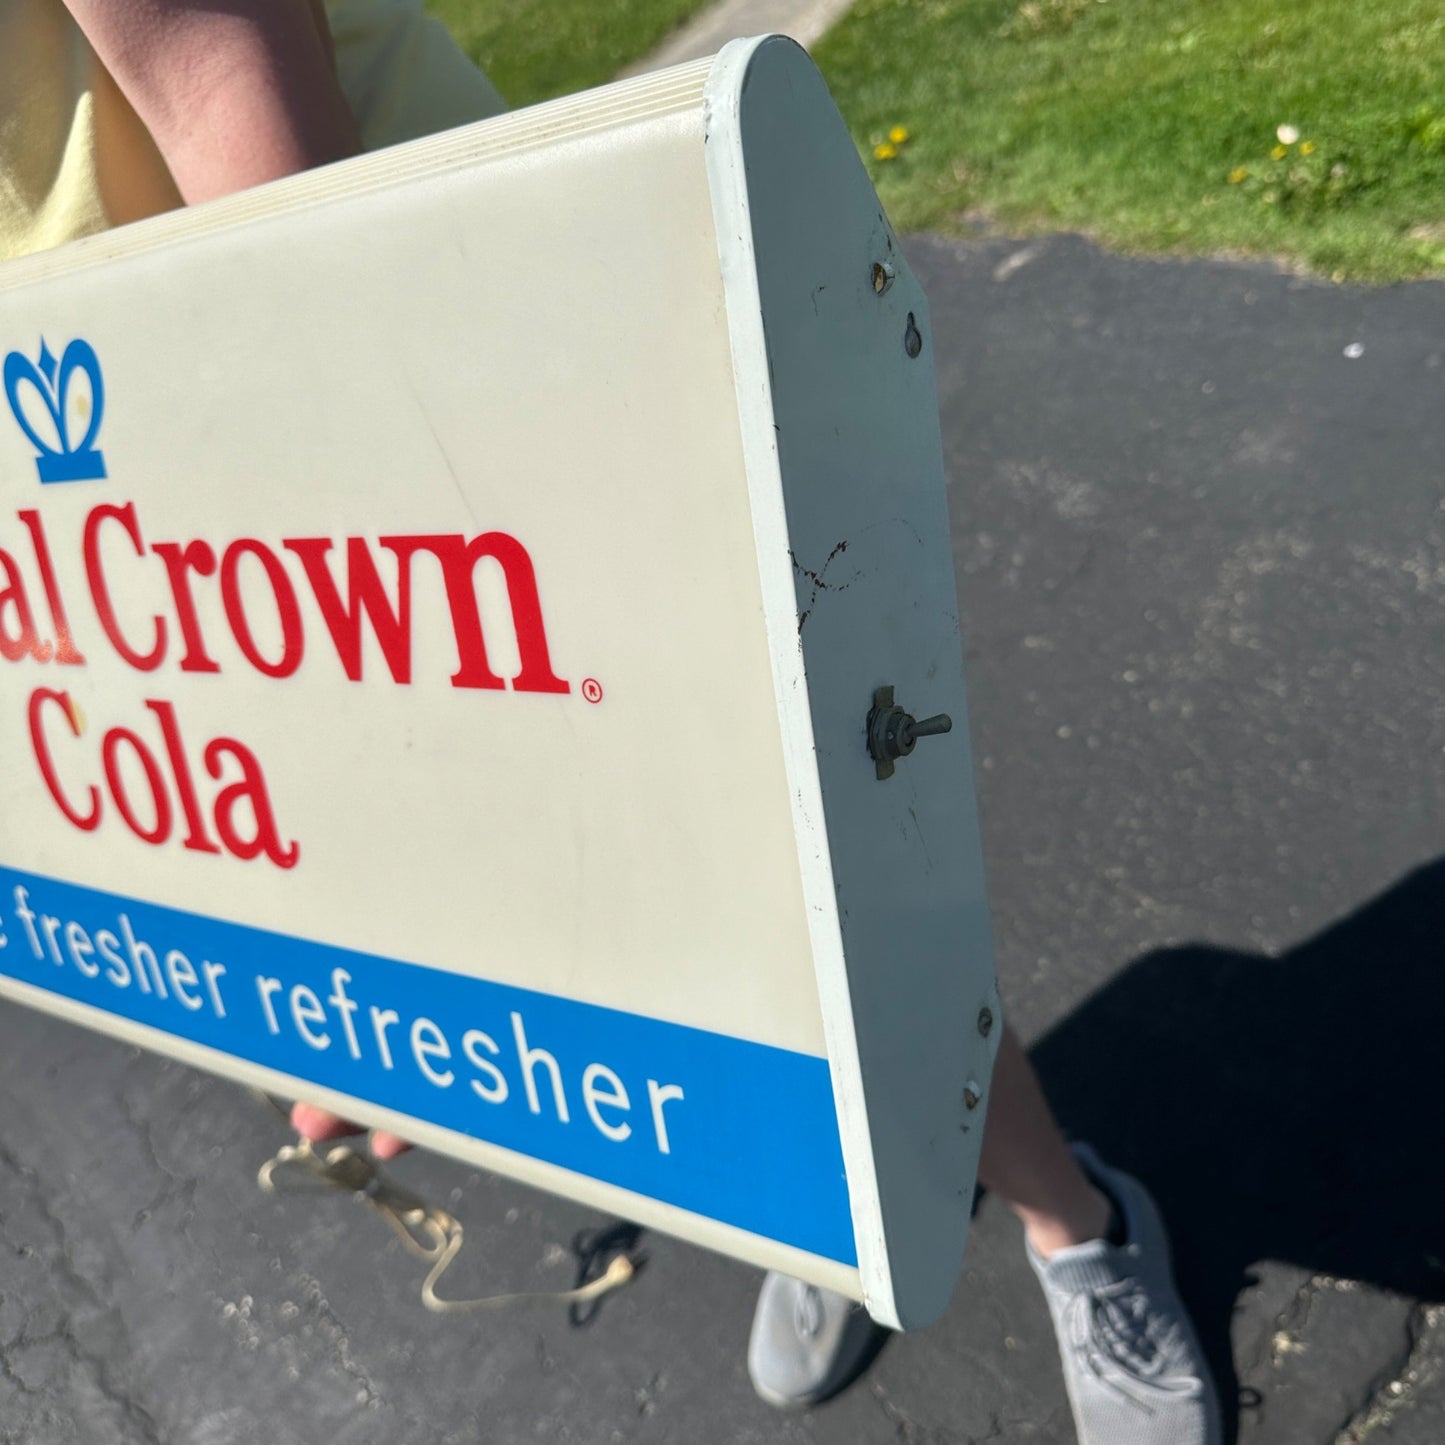 Vintage 1960s Royal Crown Cola RC Soda Lighted Advertising Clock Sign